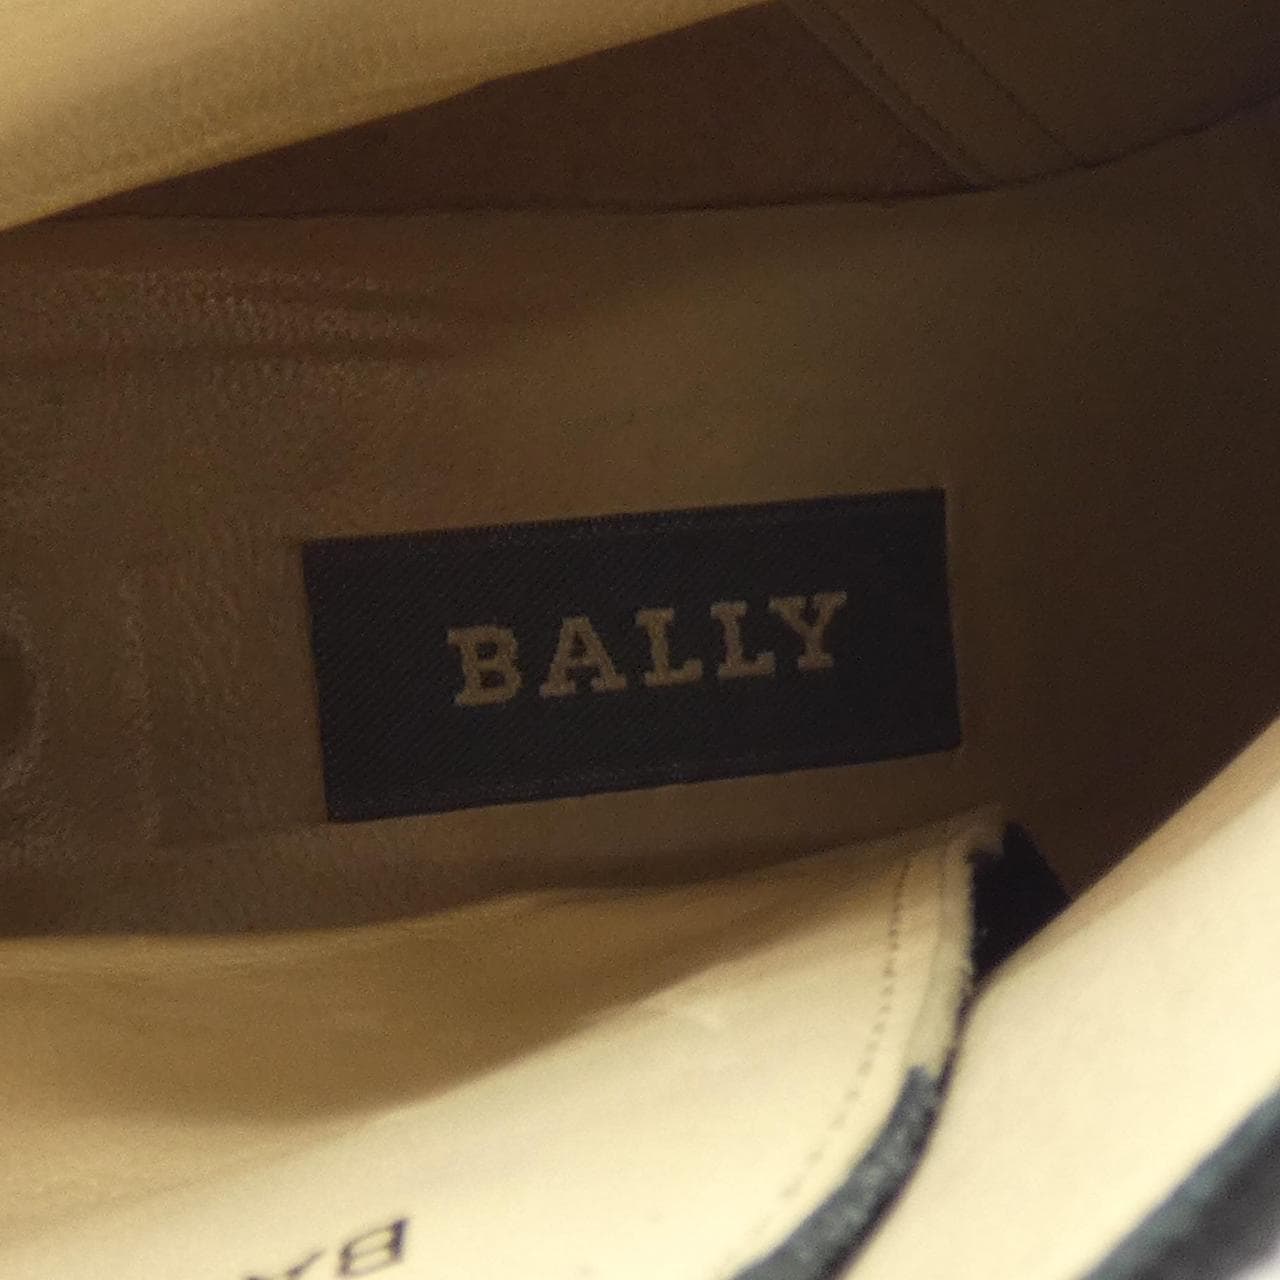 Barry BALLY boots